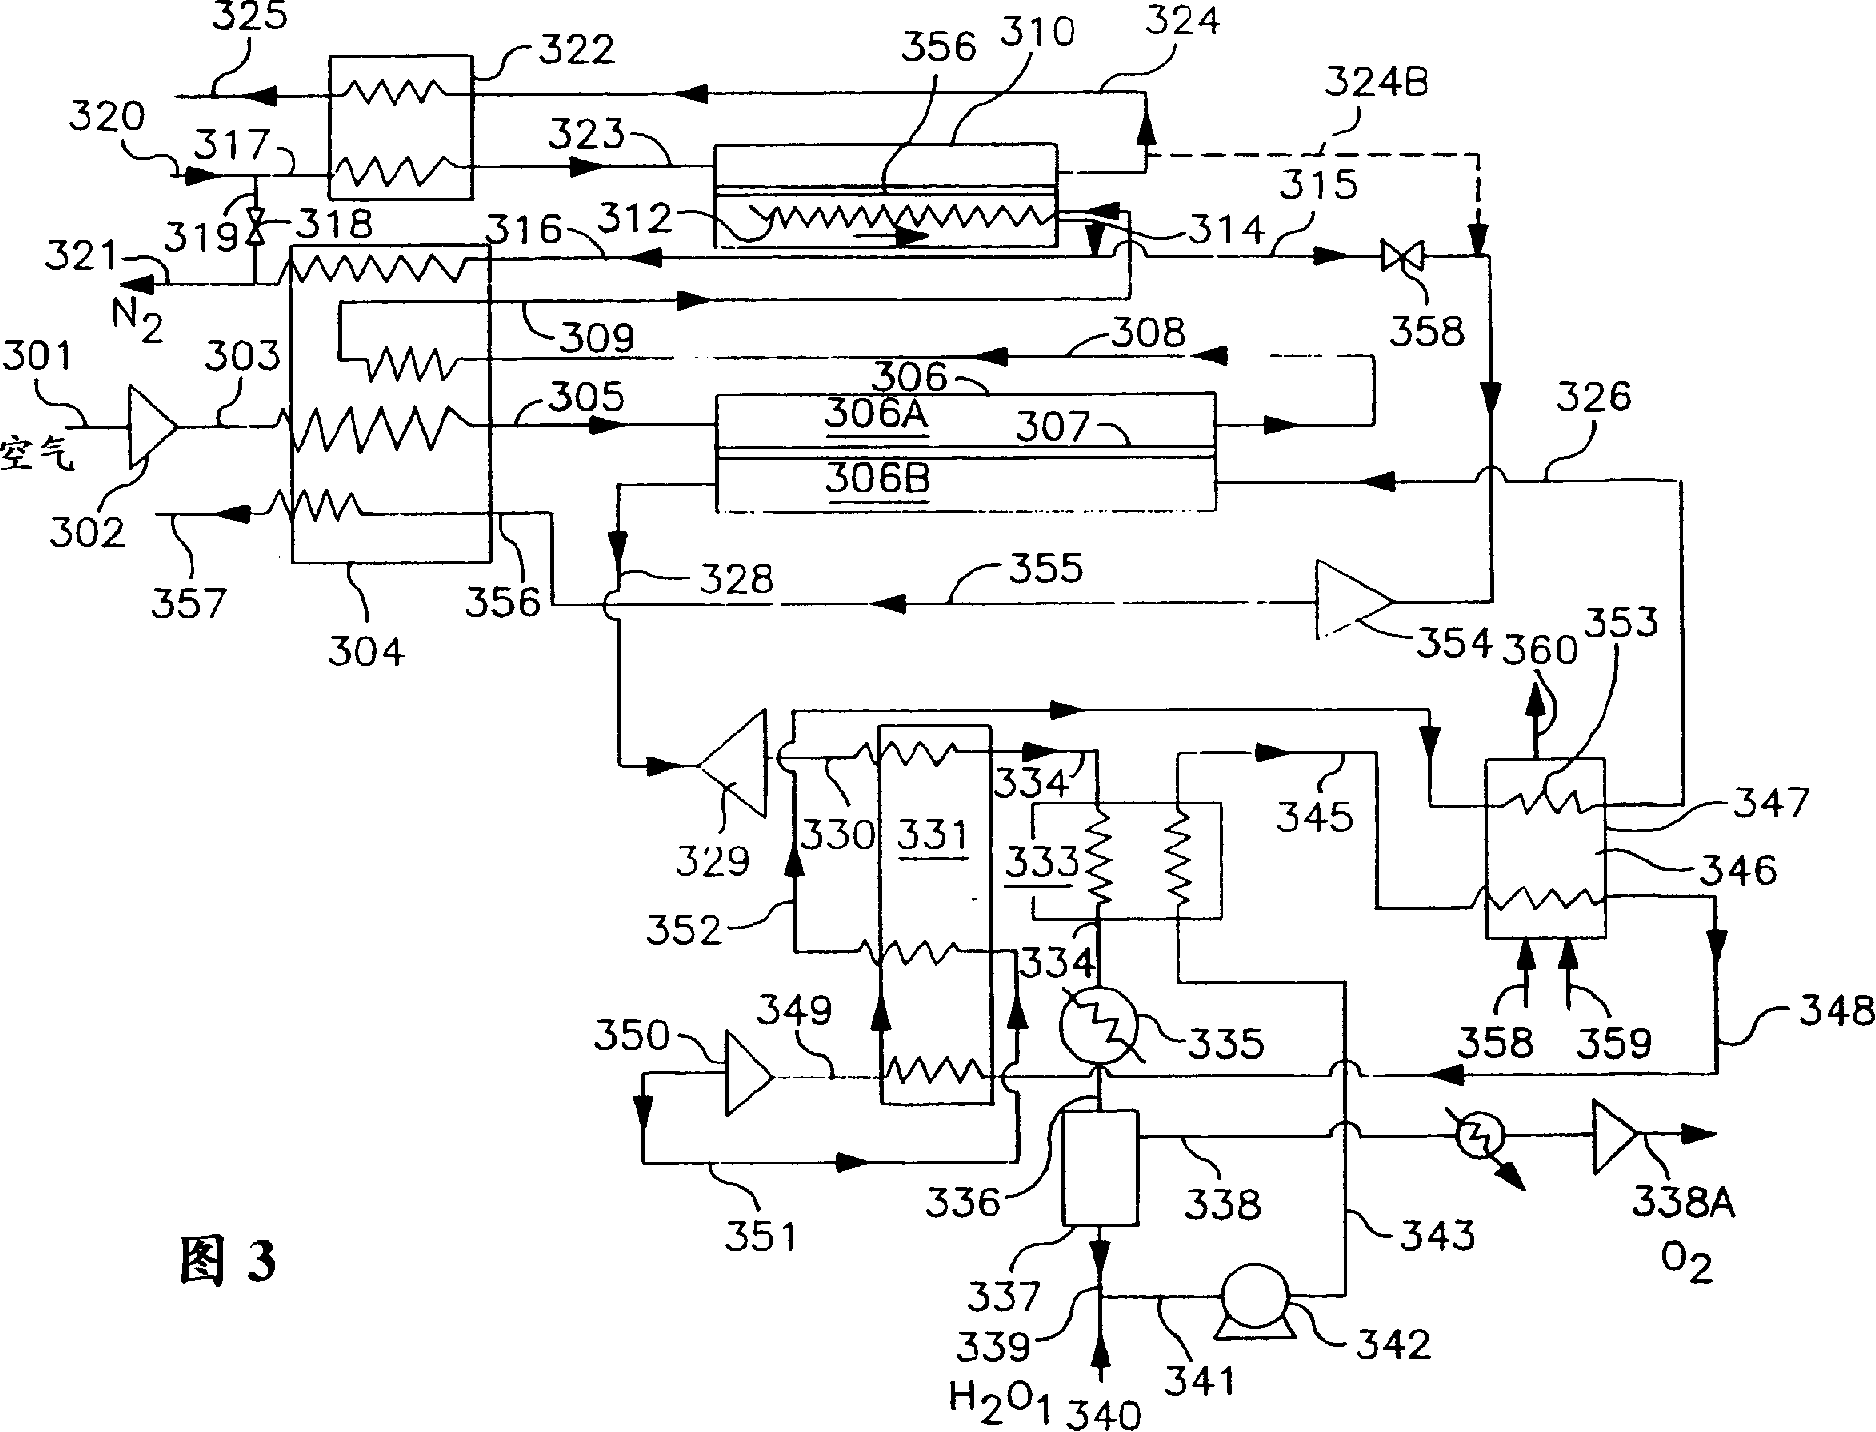 Thermally powered oxygen/nitrogen plant incorporating an oxygen selective ion transport membrane